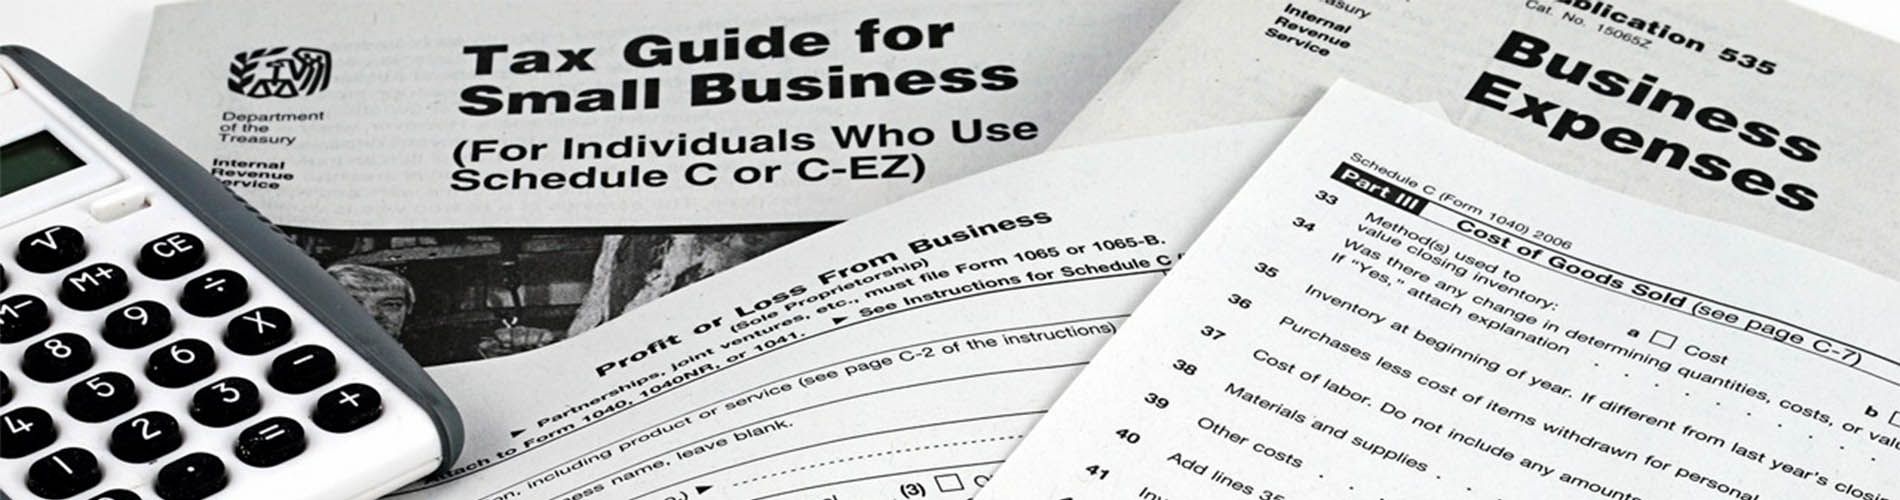 An image of several tax forms laying on top of each other and a calculator on the left.